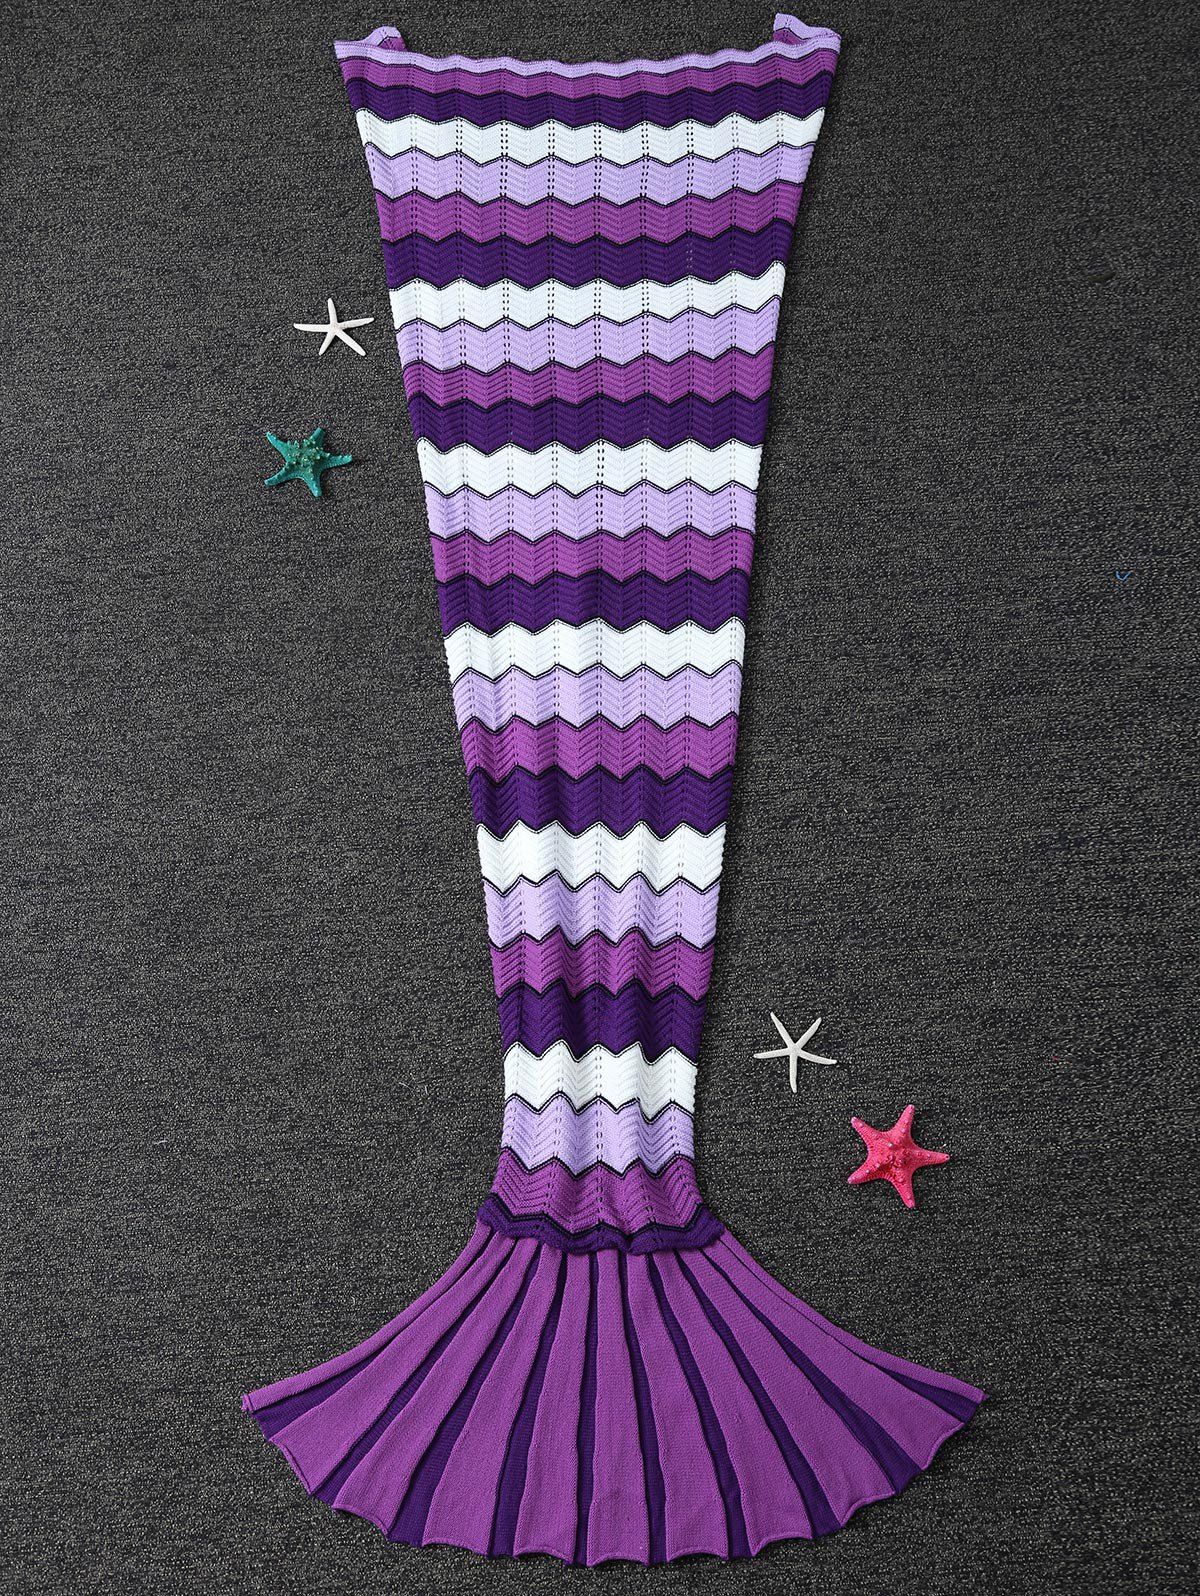 Unique Warmth Wave Pattern Knitting Mermaid Tail Blanket  